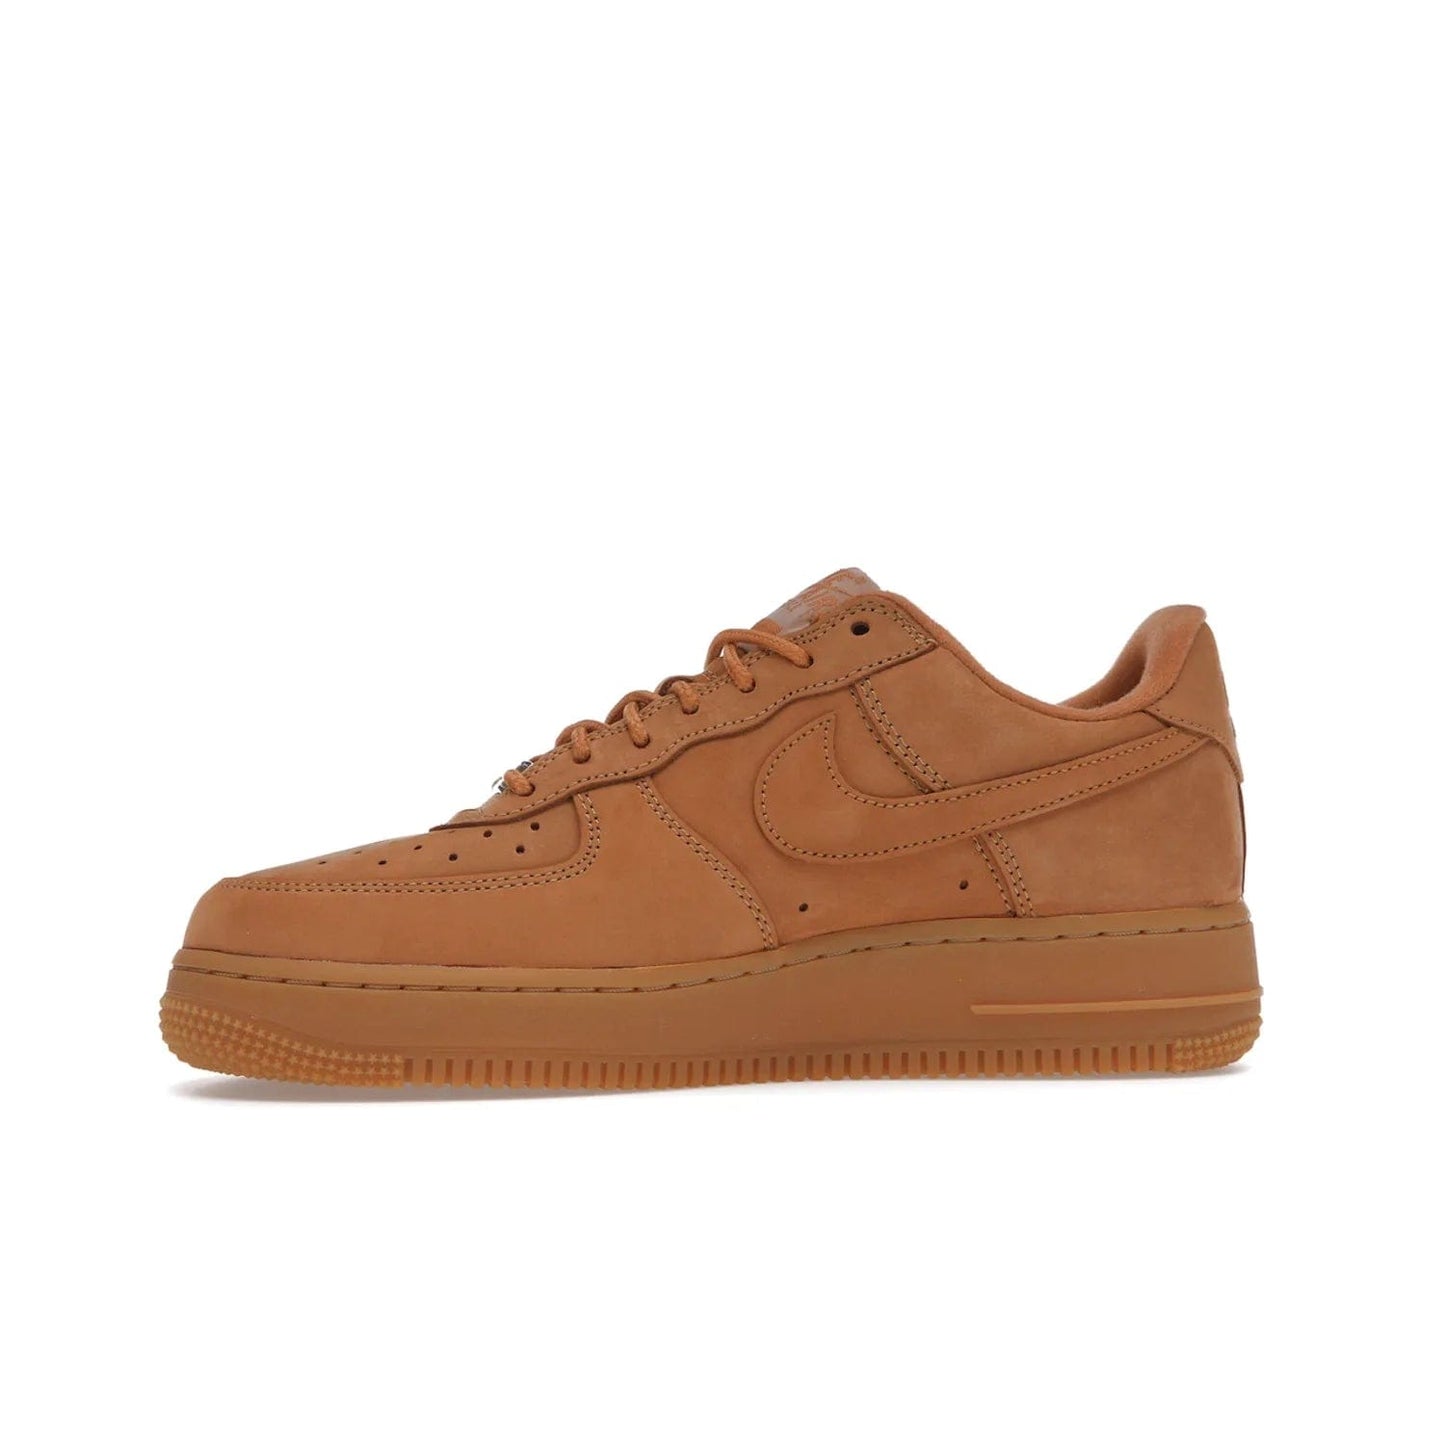 Nike Air Force 1 Low SP Supreme Wheat - Image 18 - Only at www.BallersClubKickz.com - A luxe Flax Durabuck upper and Supreme Box Logo insignias on the lateral heels make the Nike Air Force 1 Low SP Supreme Wheat a stylish lifestyle shoe. Matching Flax Air sole adds a classic touch to this collaboration between Nike and Supreme. Make a statement with this edition of the classic Air Force 1 Low.